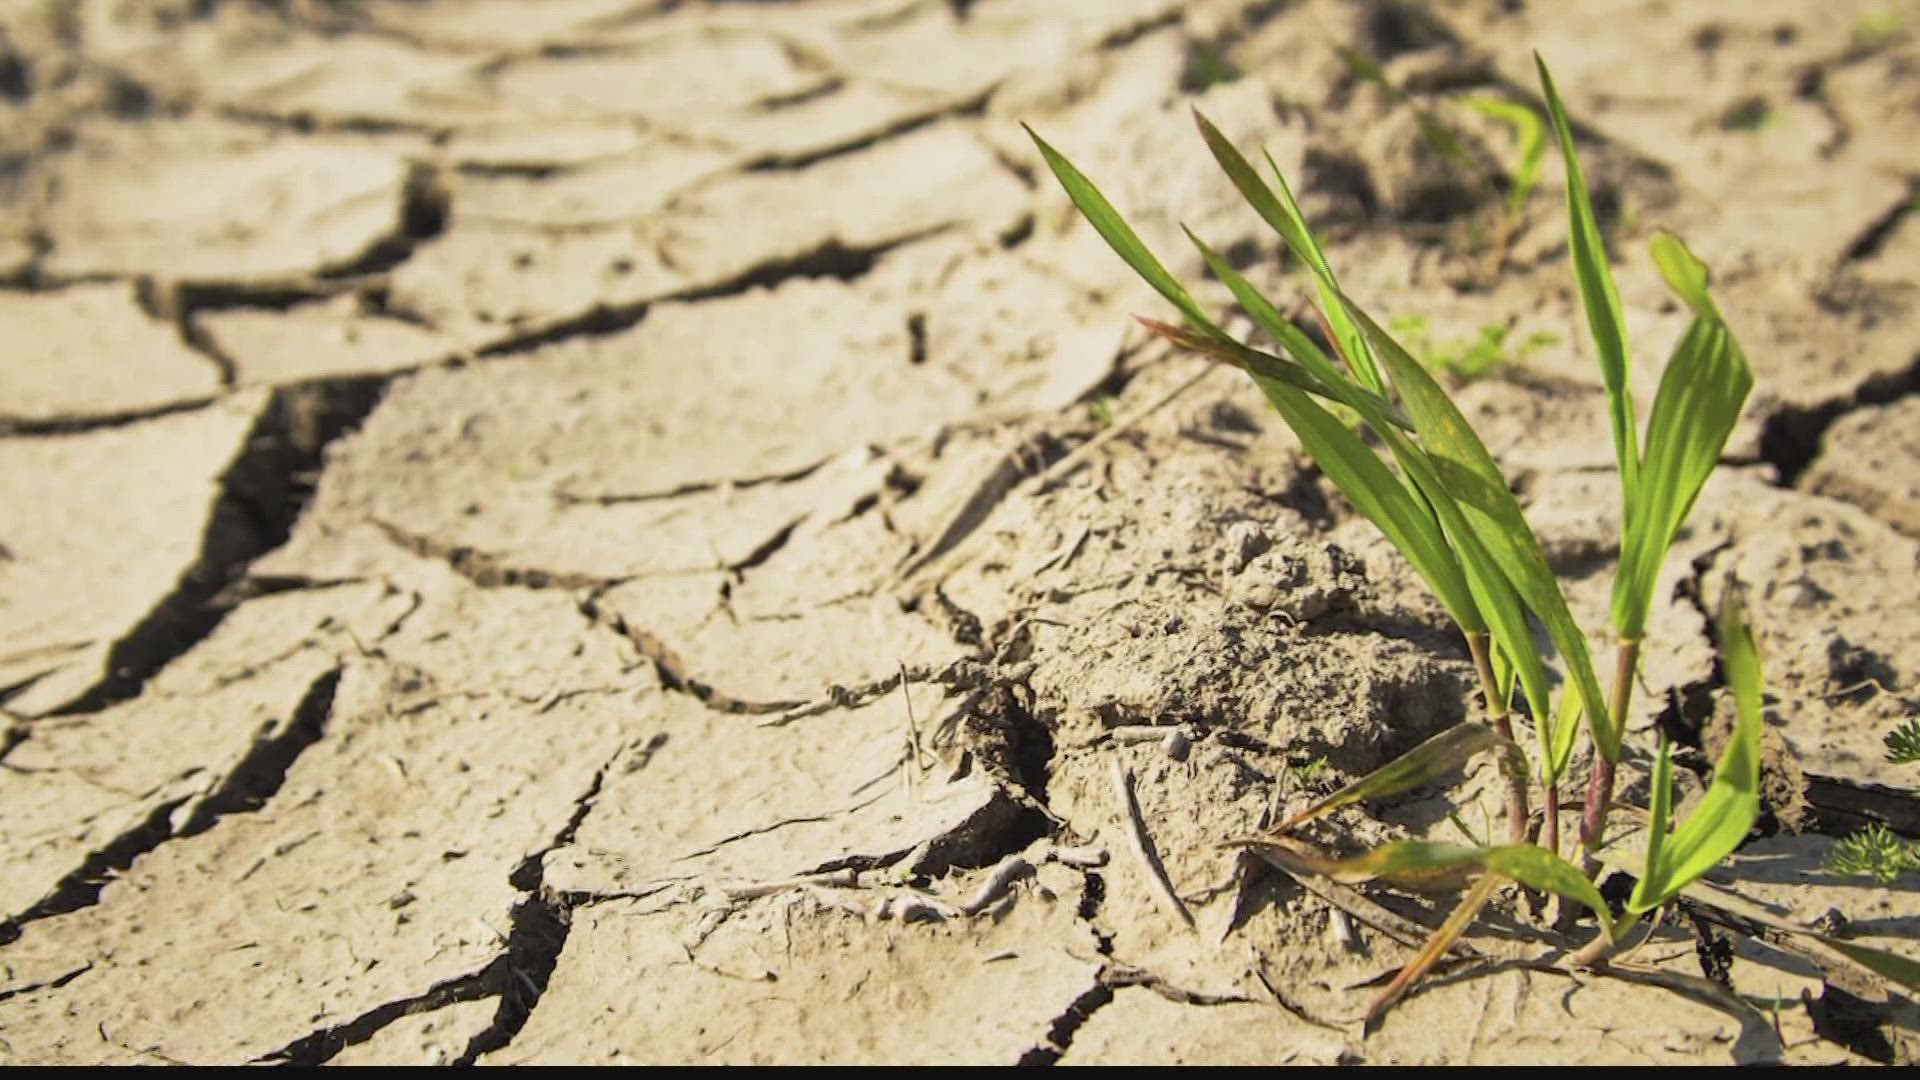 Droughts aren't just dry weather. They have environmental, economic, and social impacts.